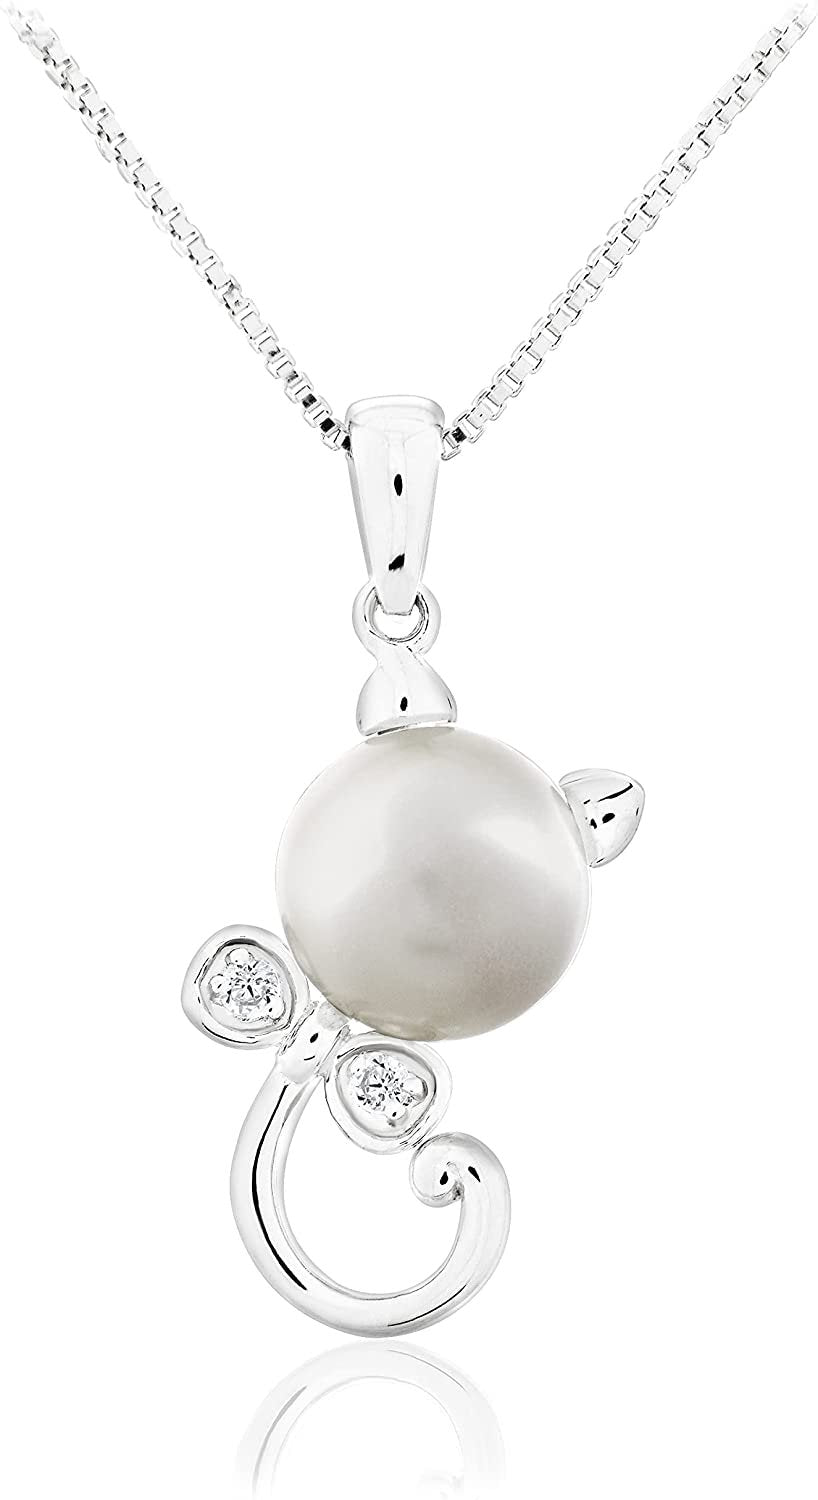 .925 Sterling Silver, 8.0mm Round White Freshwater Cultured Pearl & Lab-Grown White Sapphire 1” Cat with Bowtie Dangling Pendant Necklace - 18”